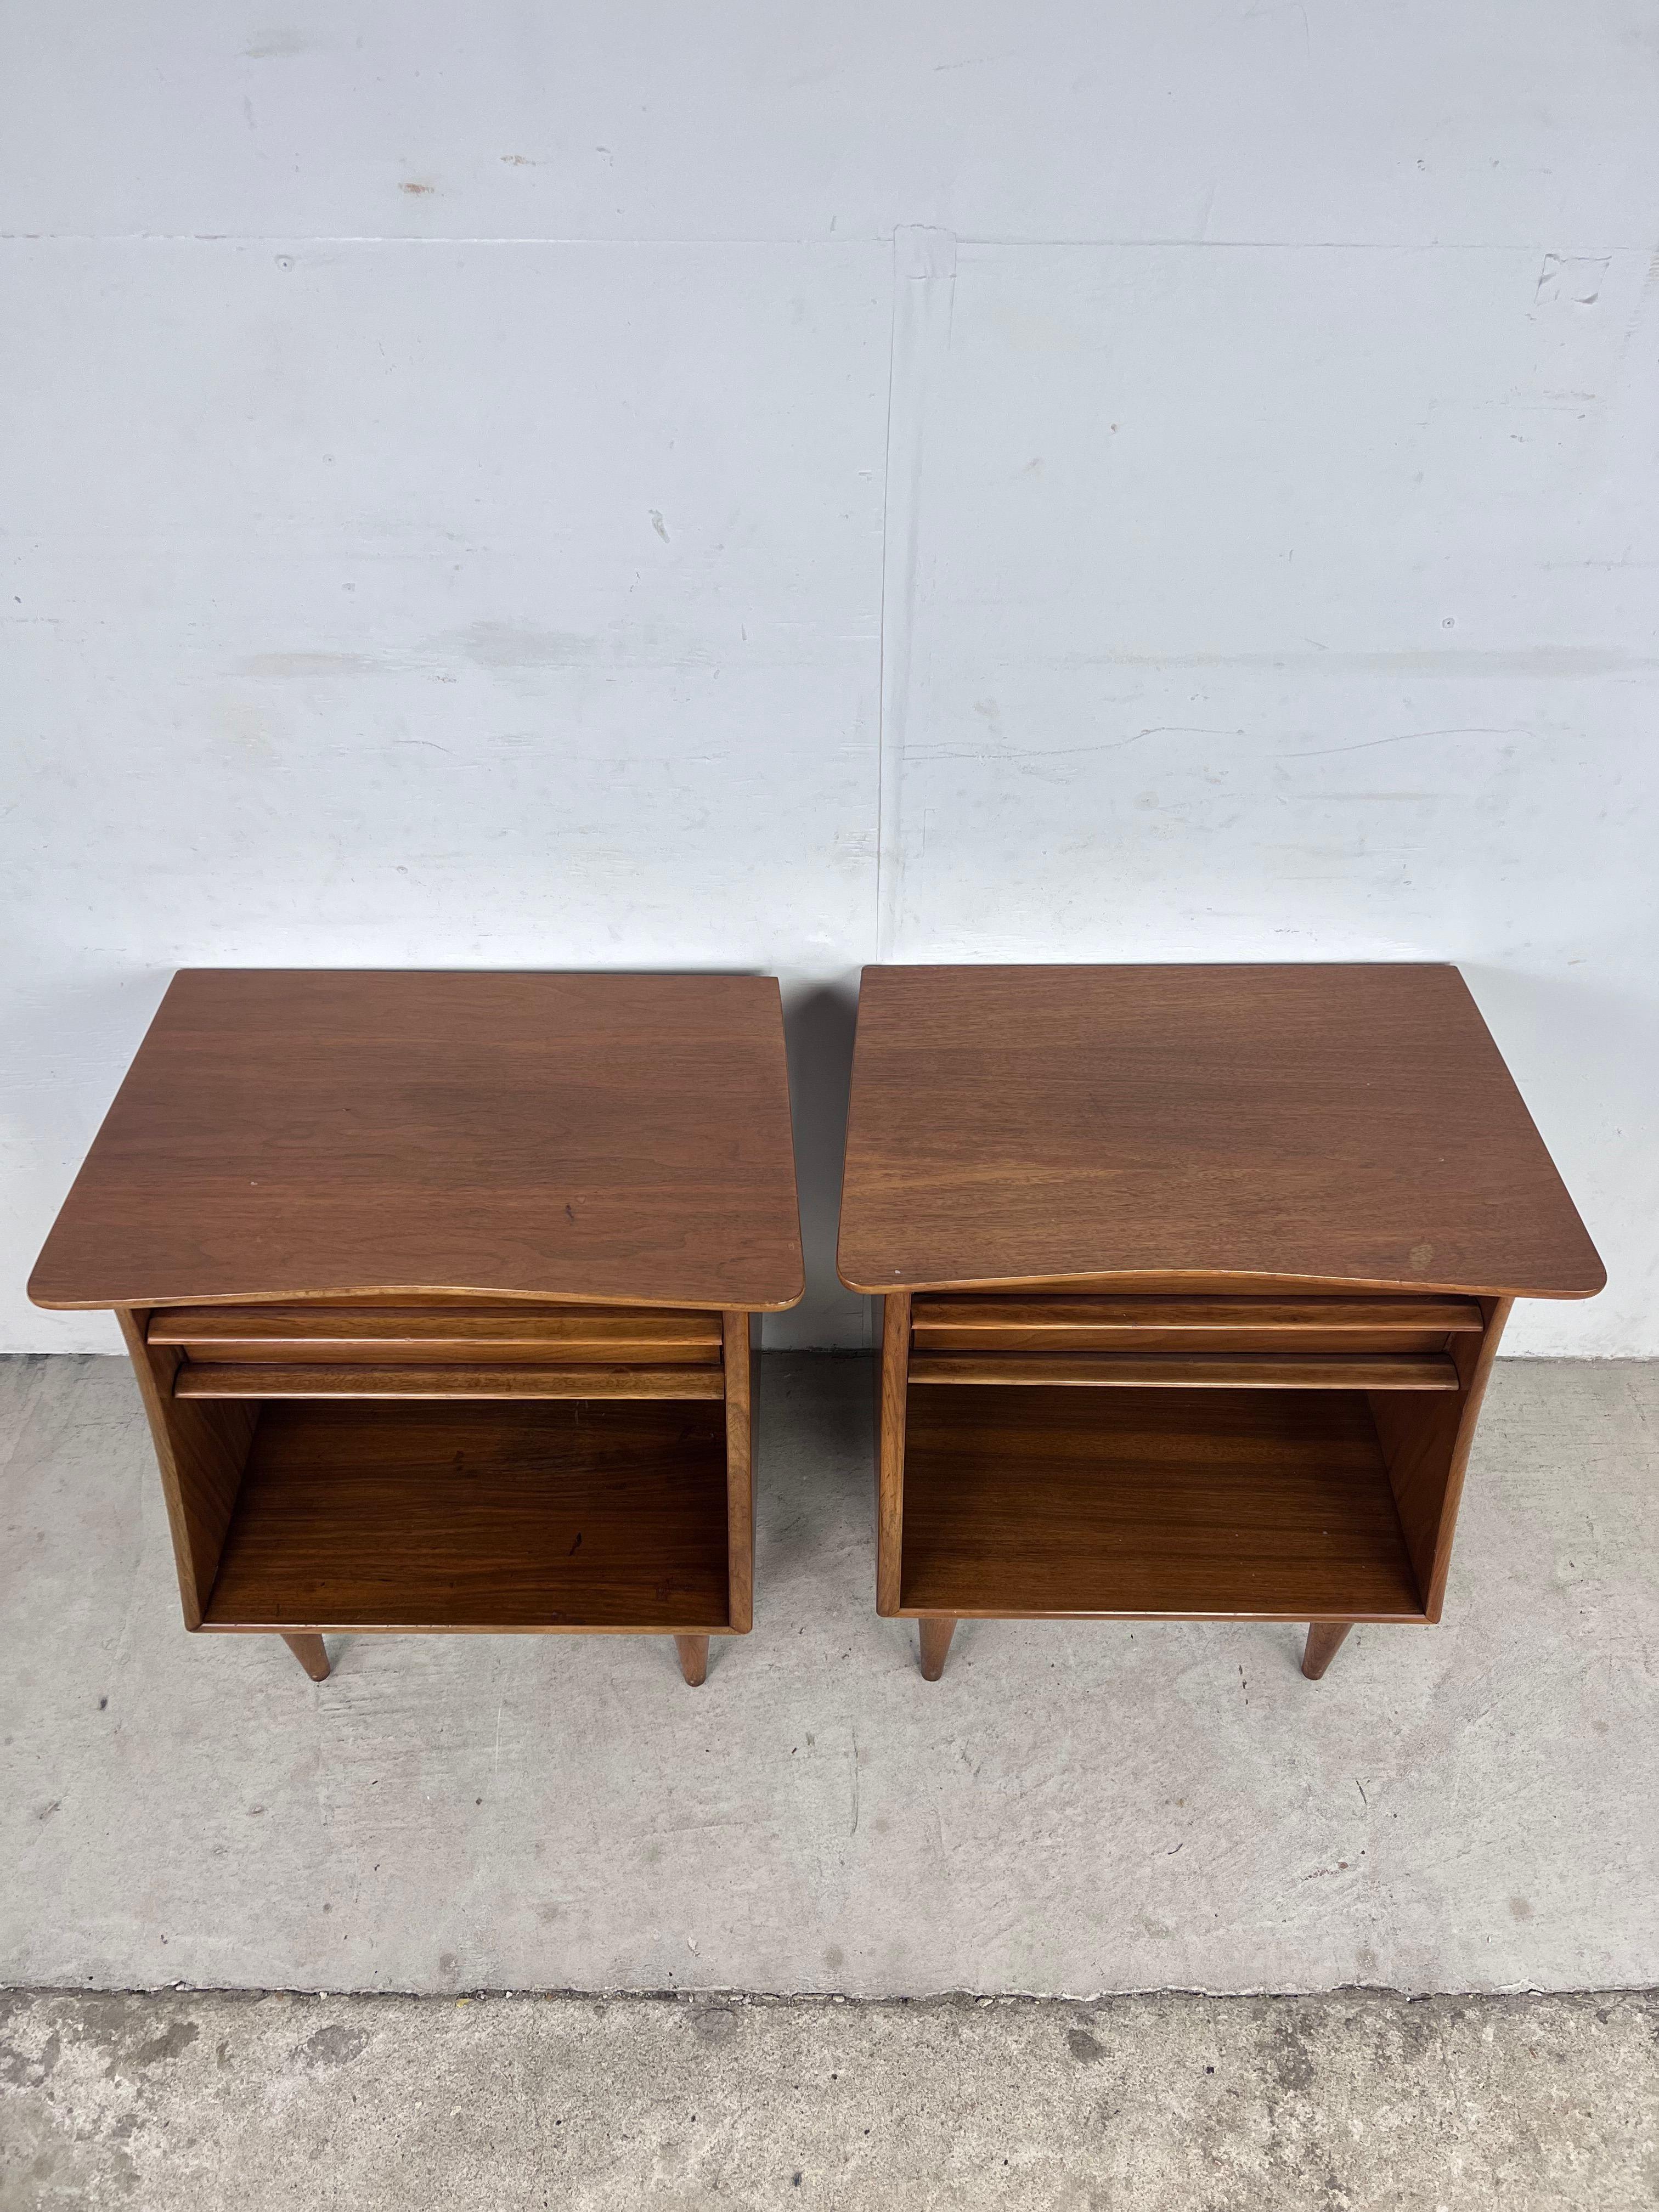 This pair of mid century modern nightstands from the Foreteller line by Kent Coffey feature hardwood construction, original walnut finish, single dovetailed drawer with unique carved pull, opened storage shelf, and tall tapered legs.

Matching